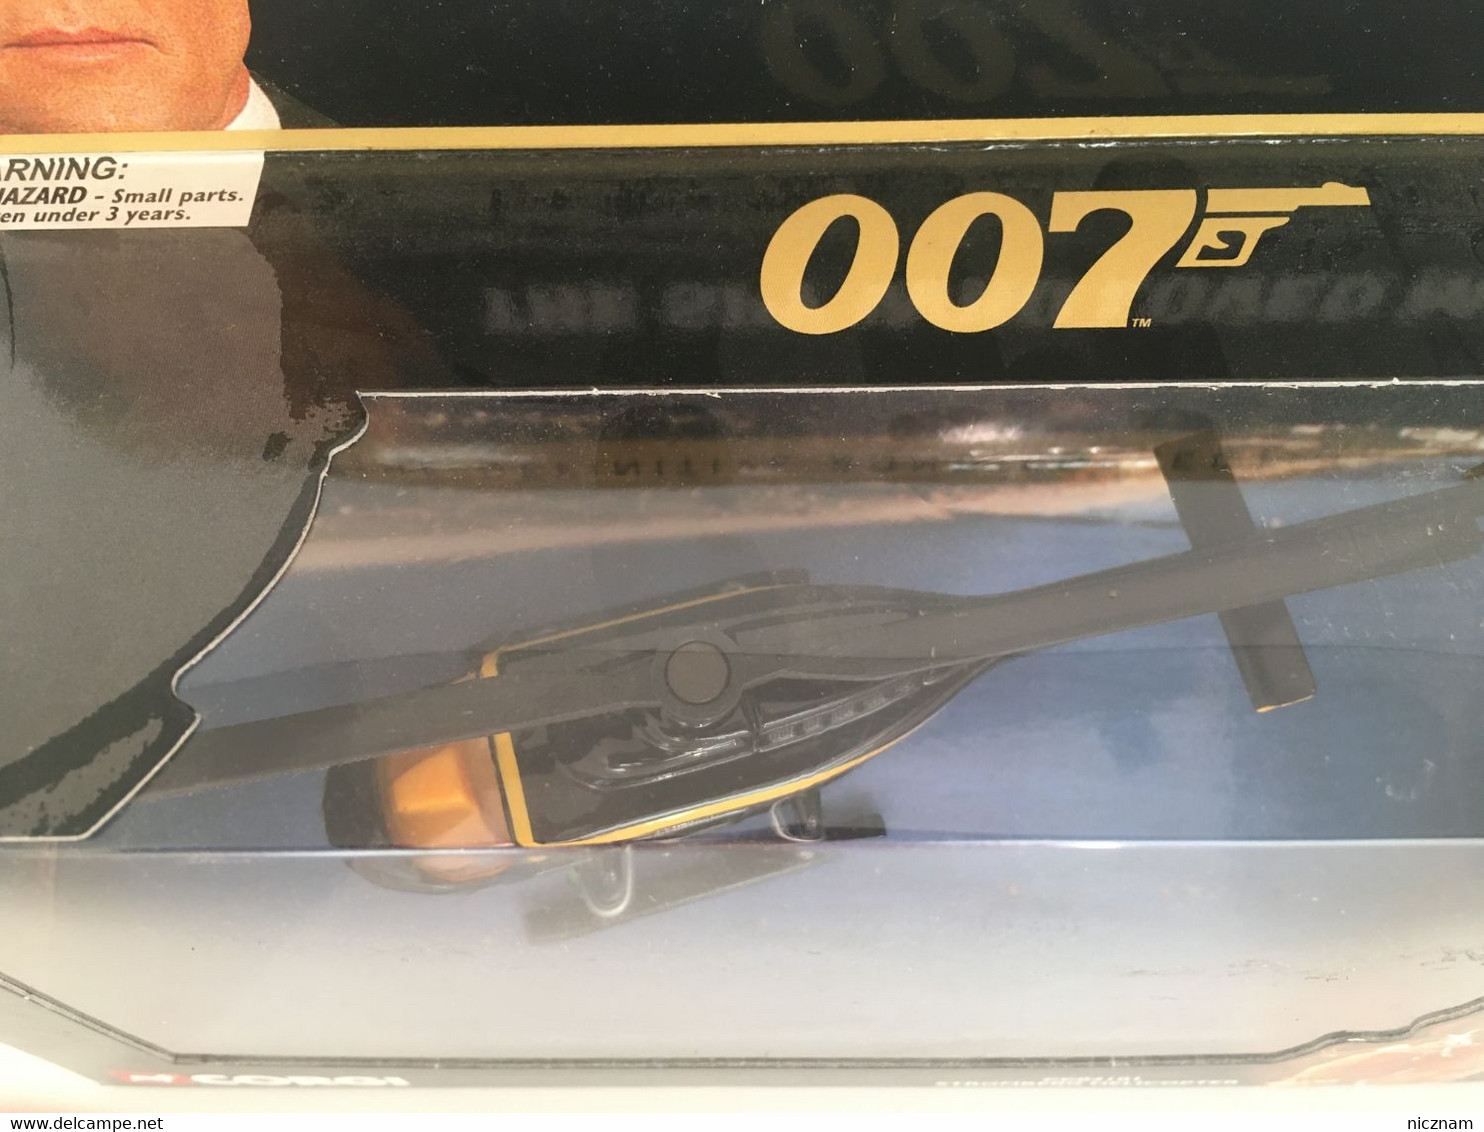 CORGI The Definitive James Bond Collection - Stromberg Helicopter - Collectors & Unusuals - All Brands